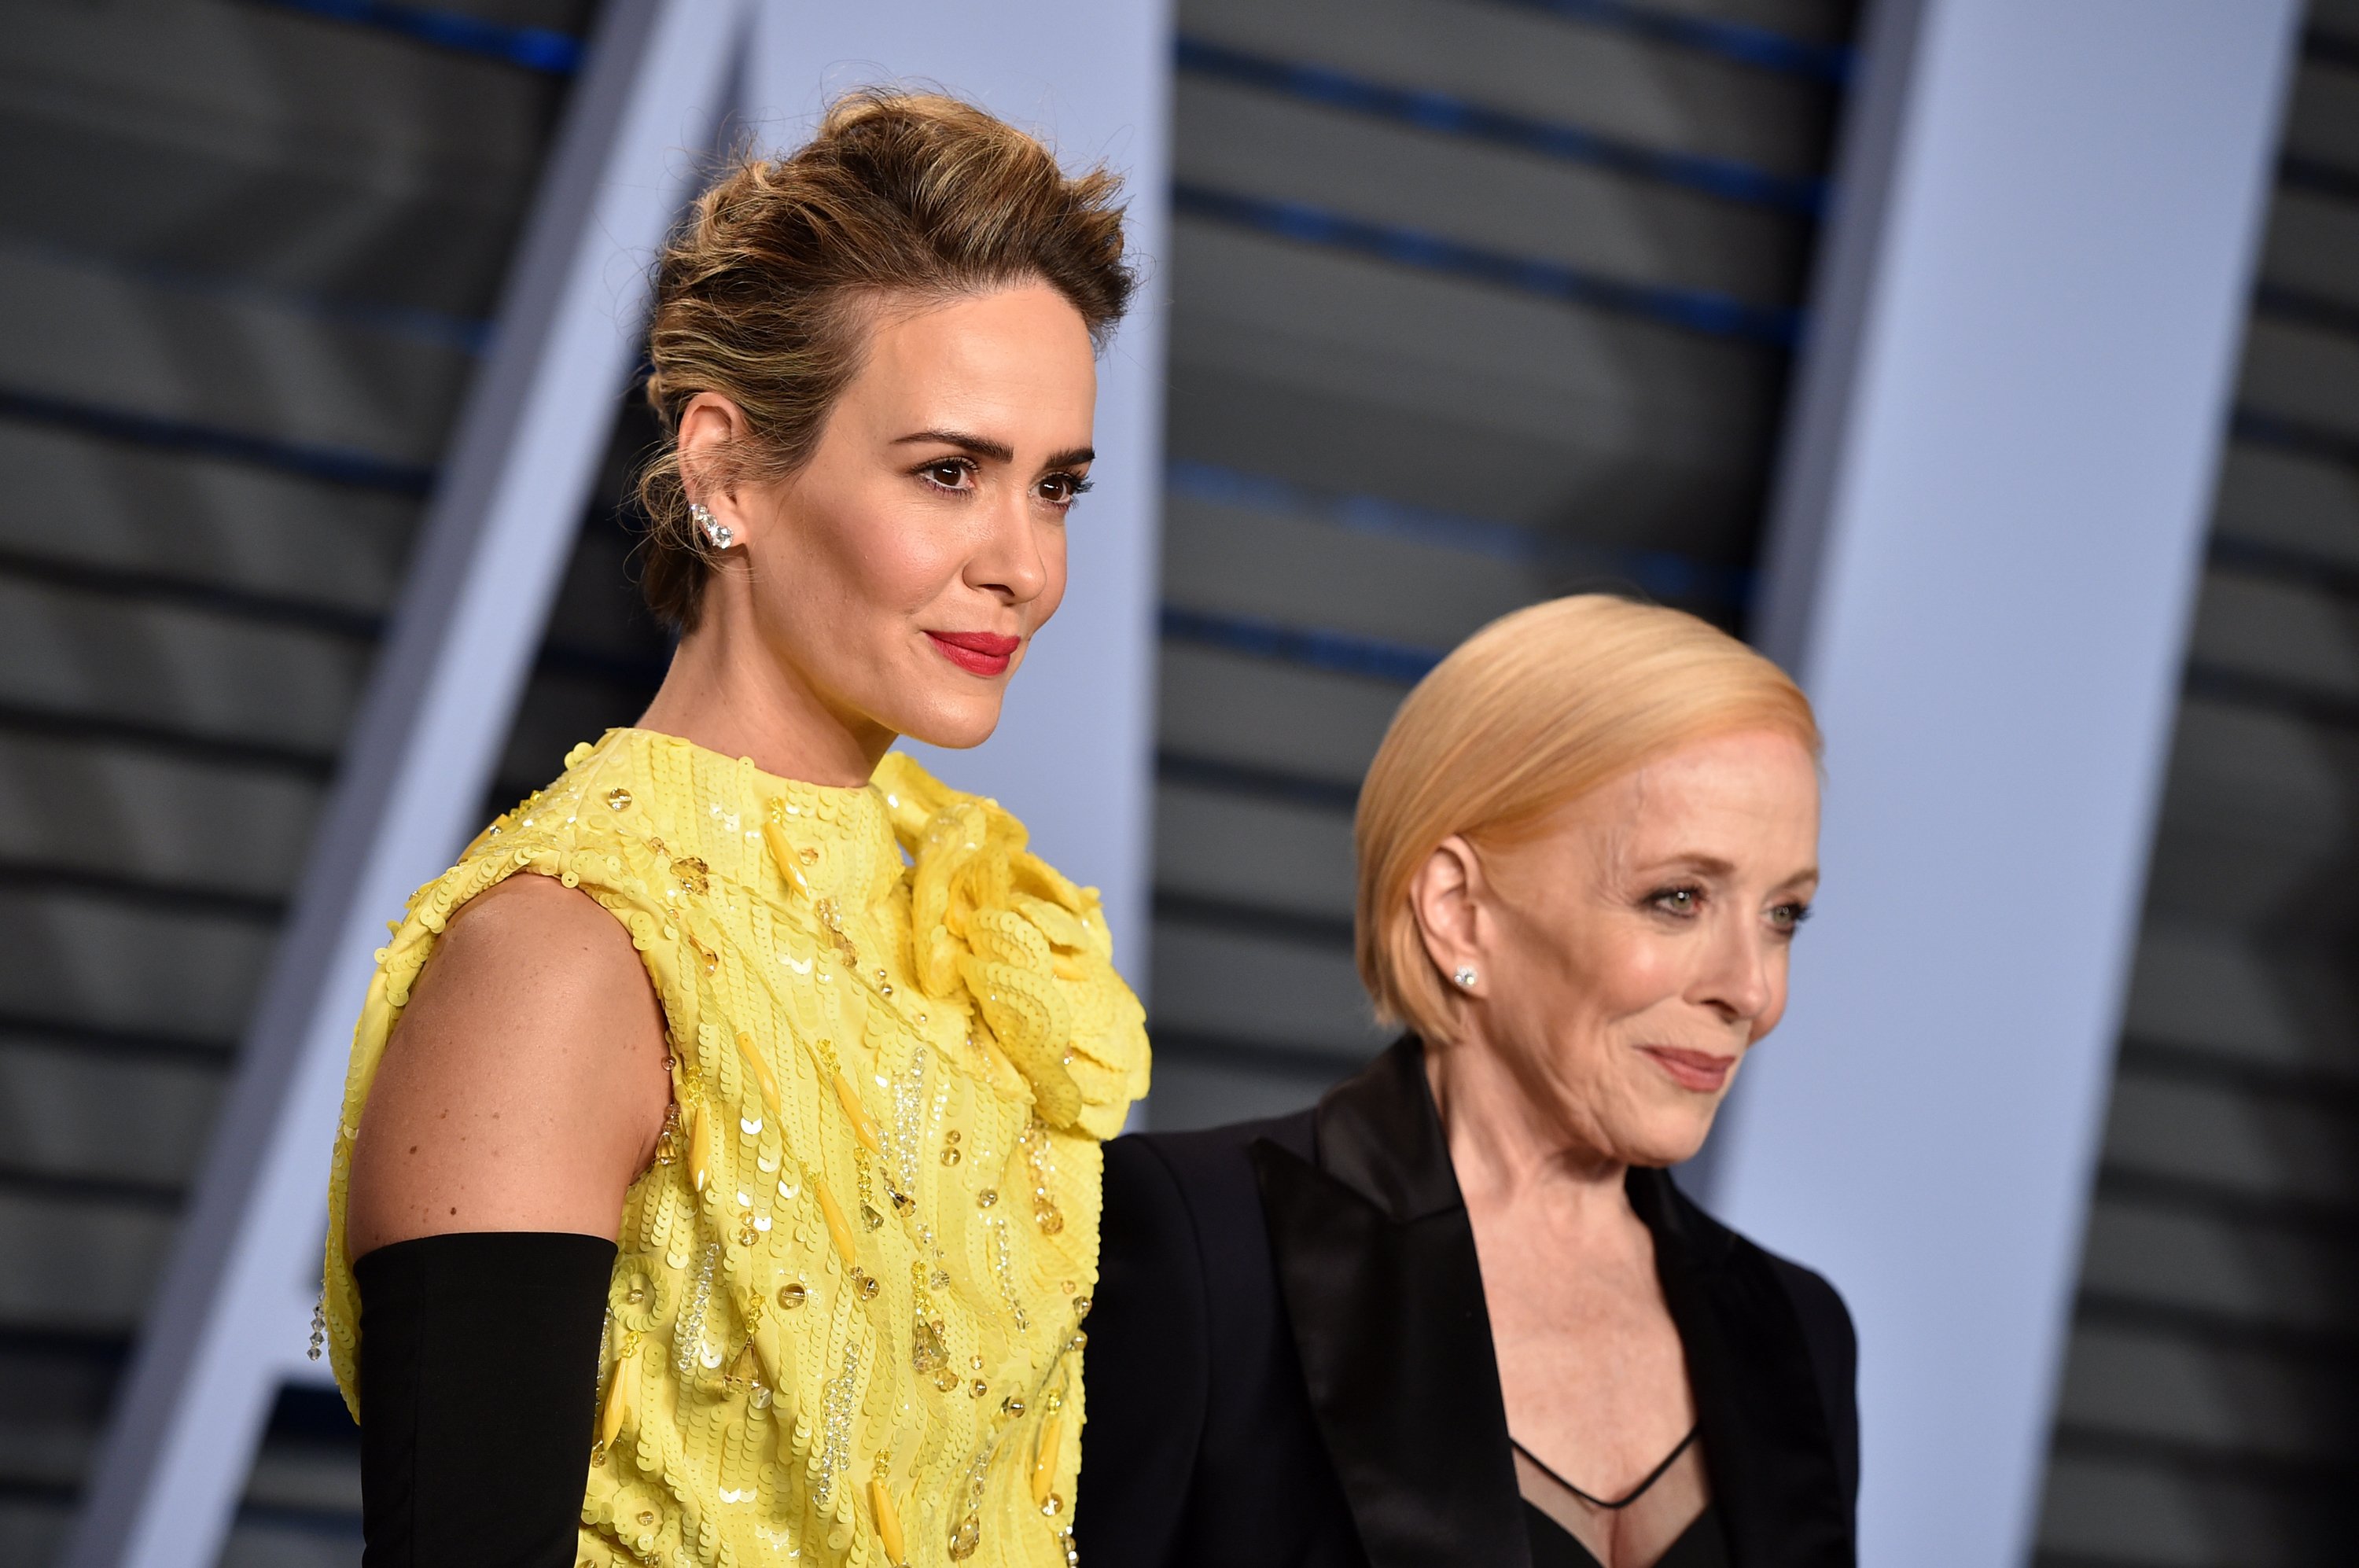 Sarah Paulson and Holland Taylor during the 2018 Vanity Fair Oscar Party. | Source: Getty Images